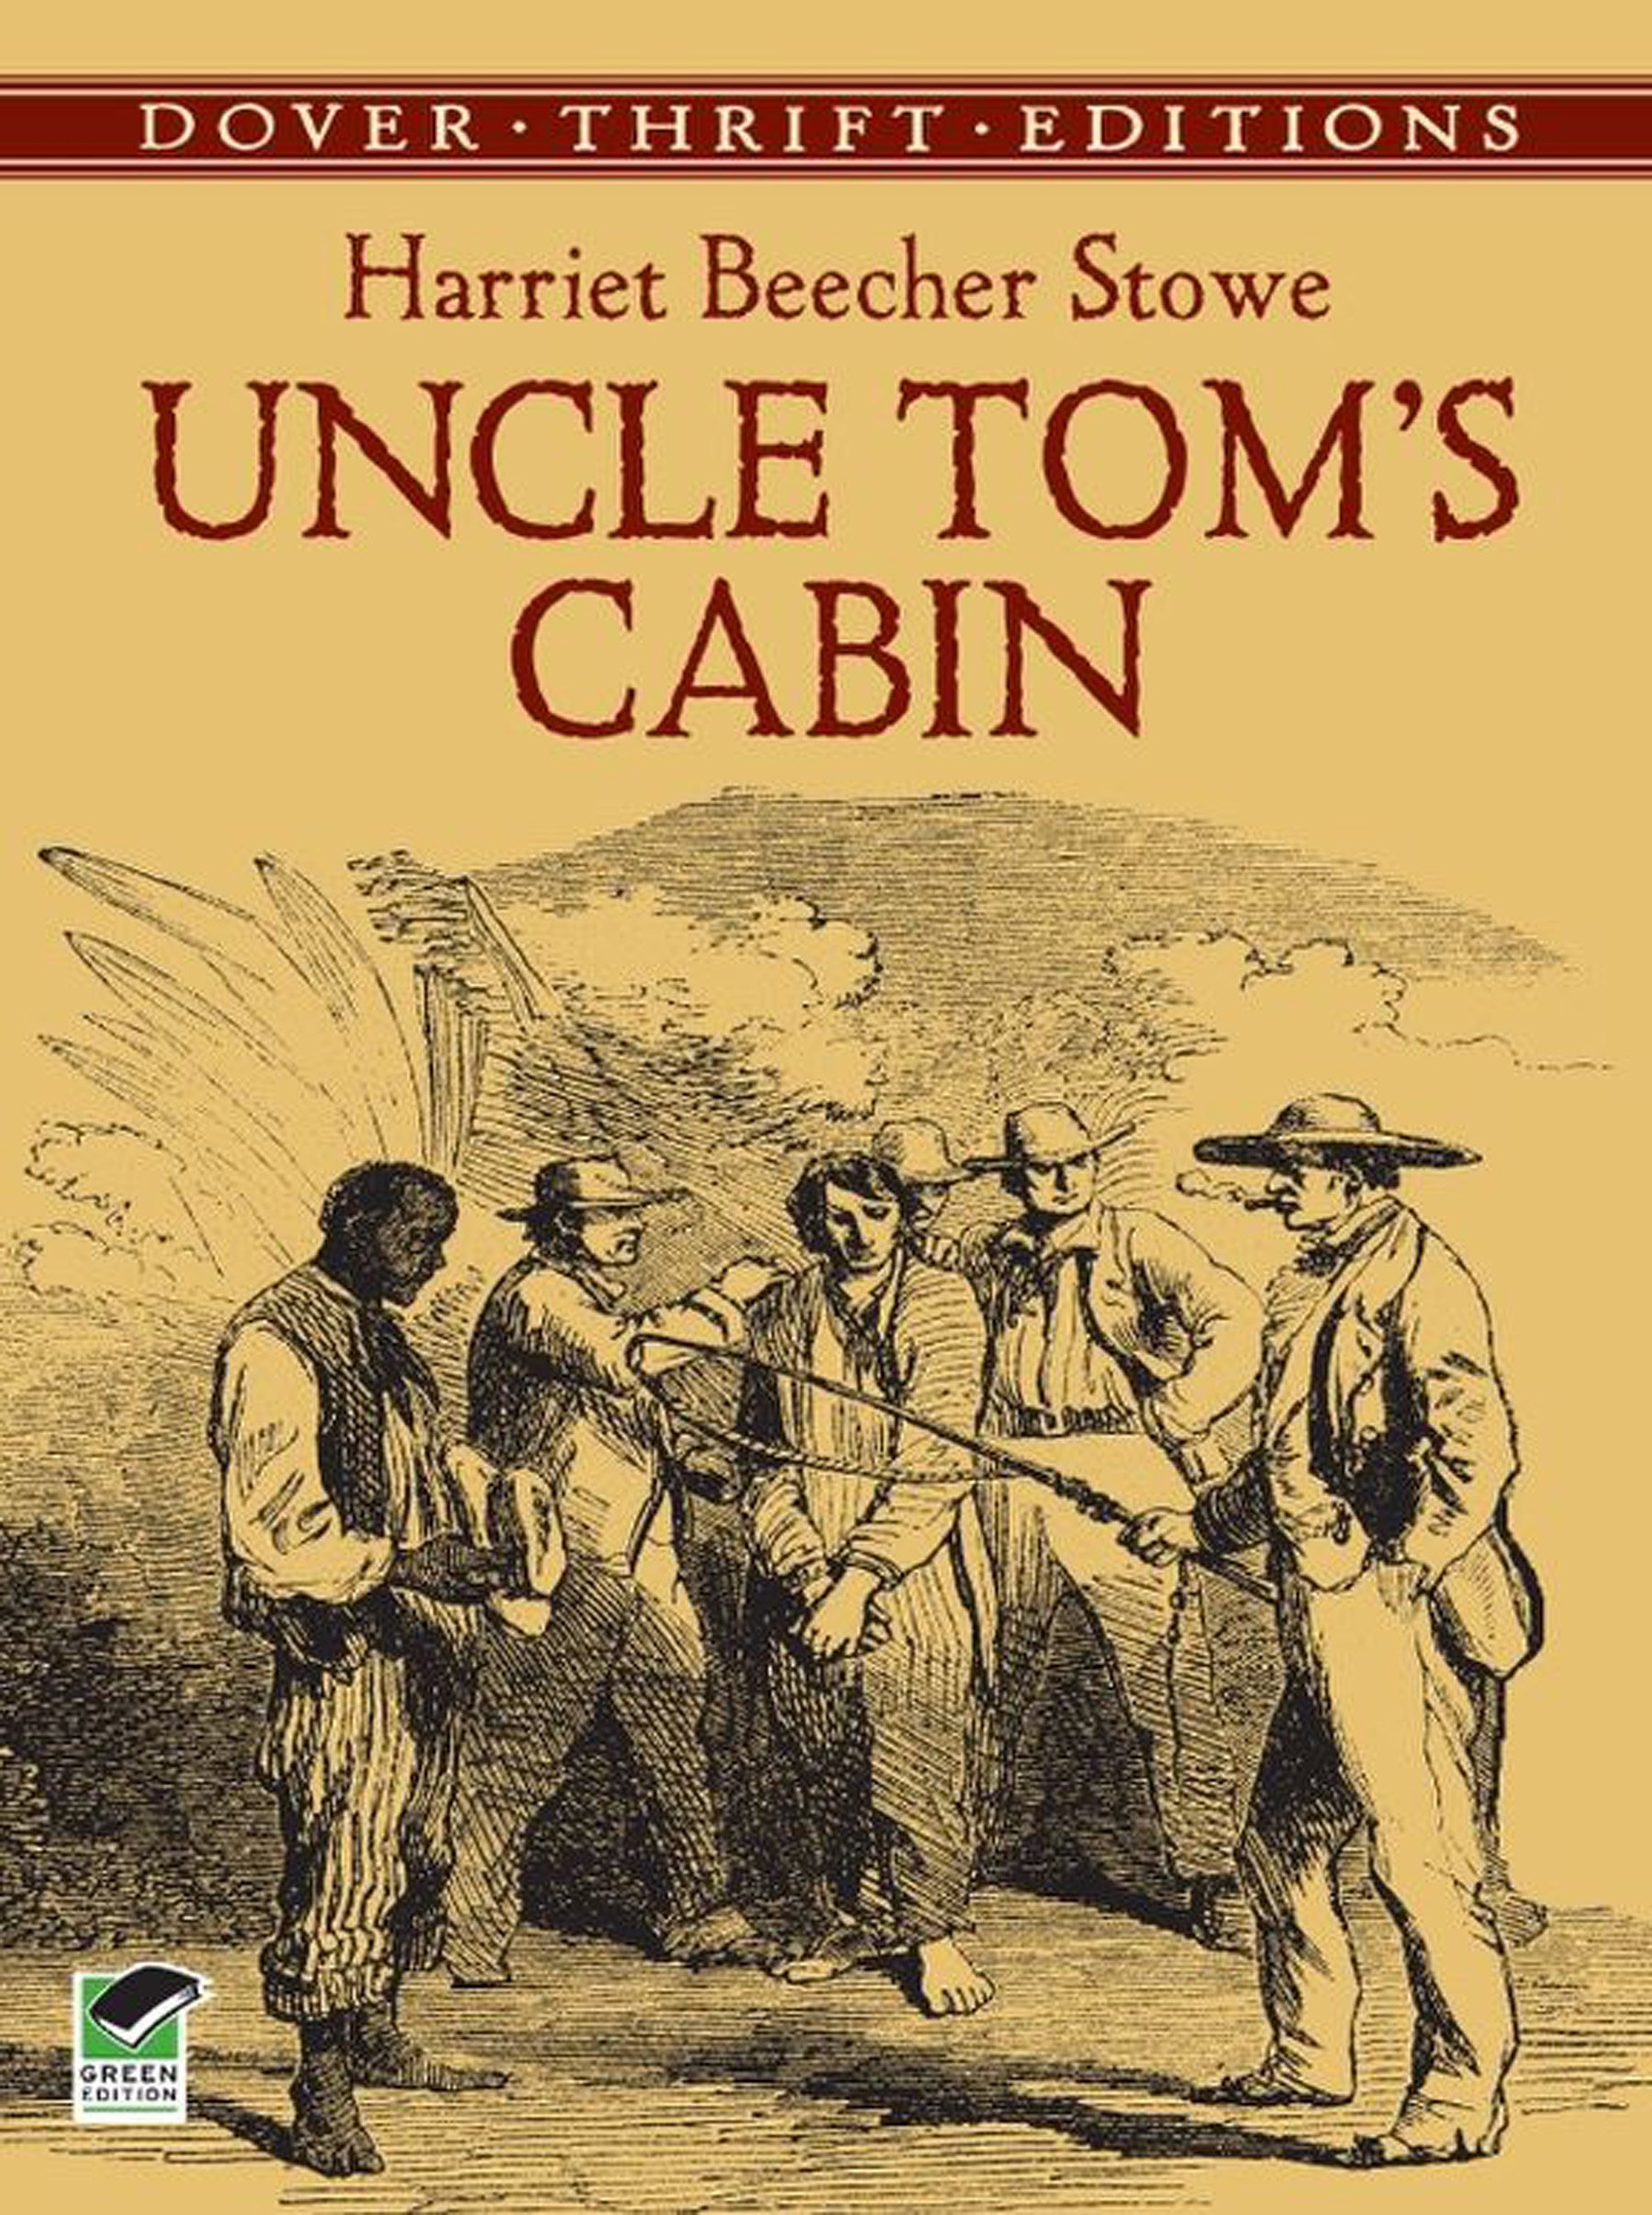 Harriet Beecher Stowe’s “Uncle Tom’s Cabin” is published